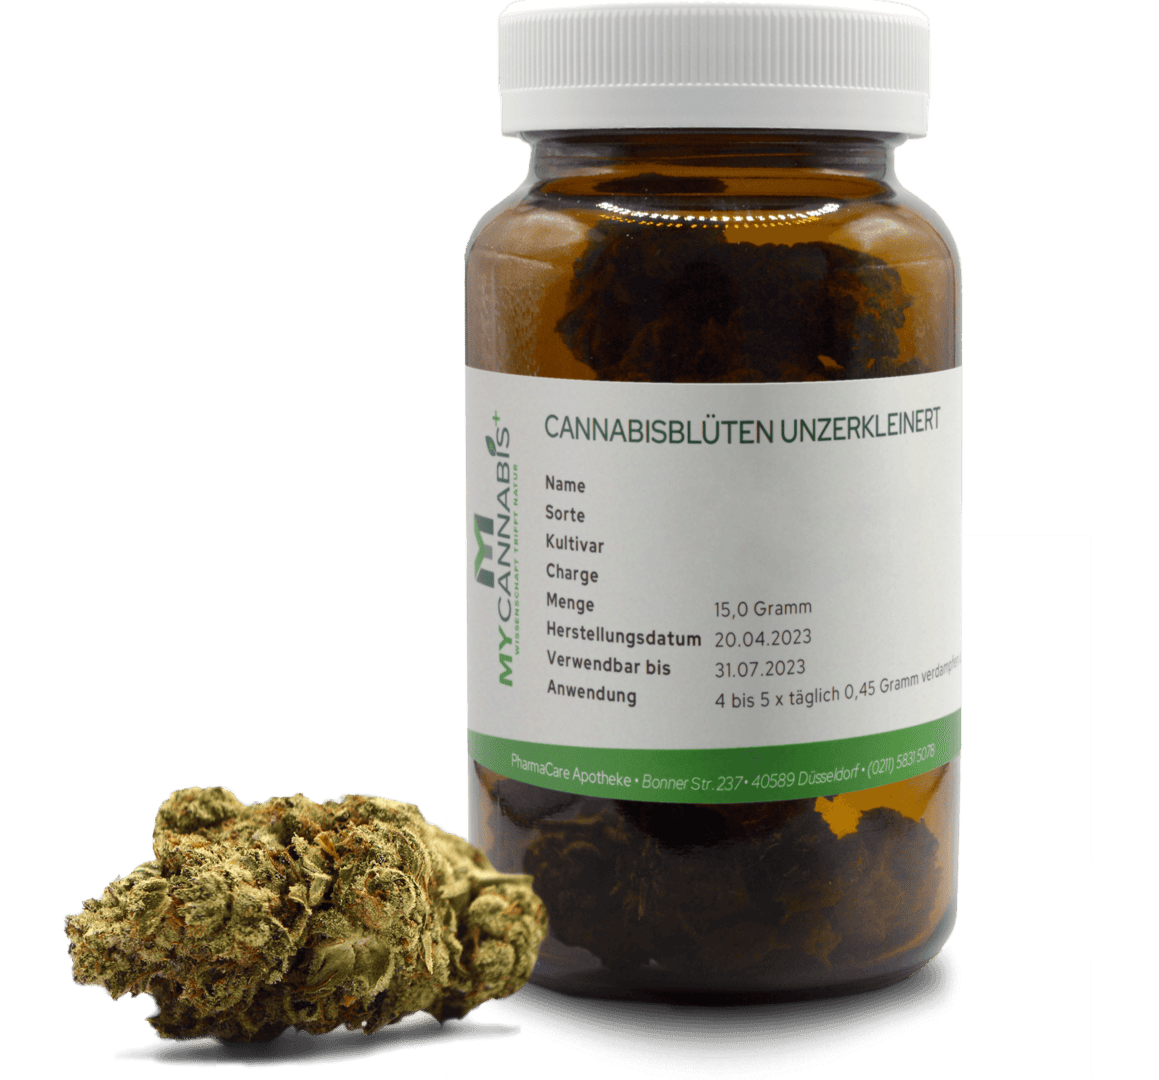 How do I get a medical cannabis prescription in Germany?